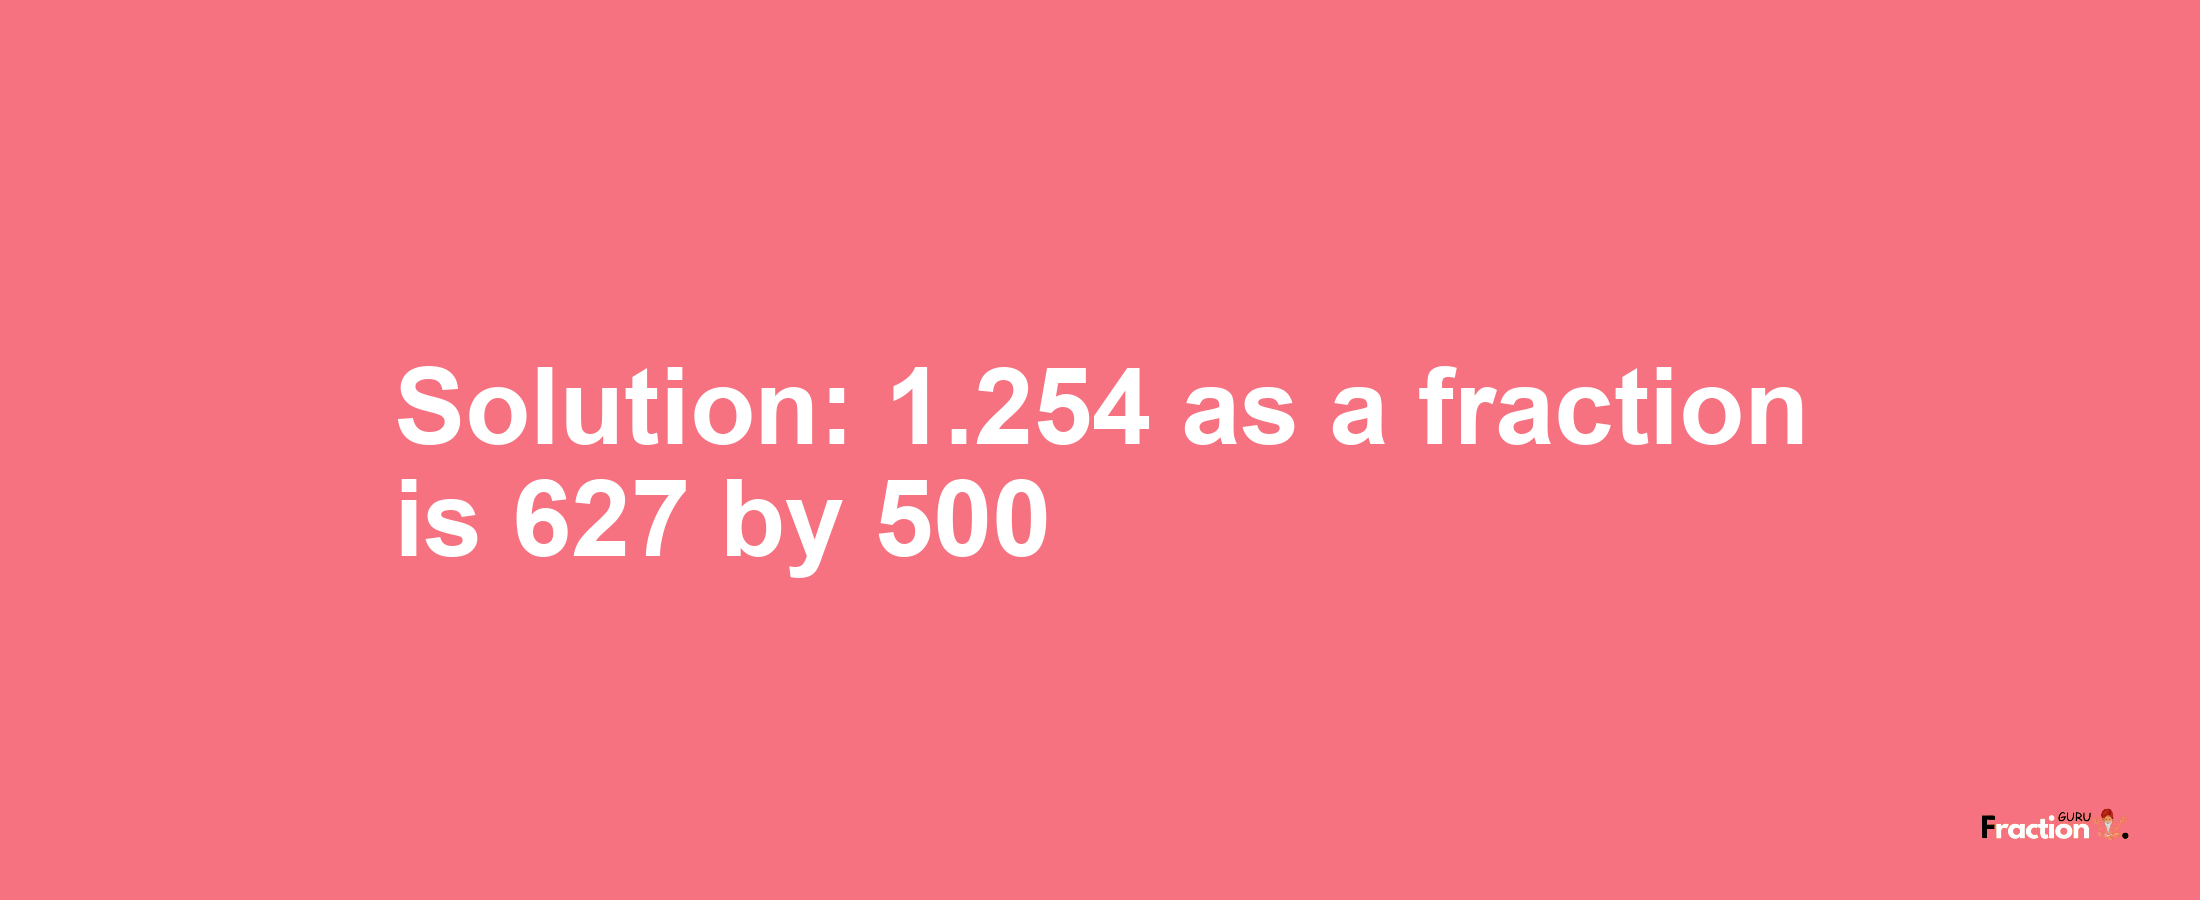 Solution:1.254 as a fraction is 627/500